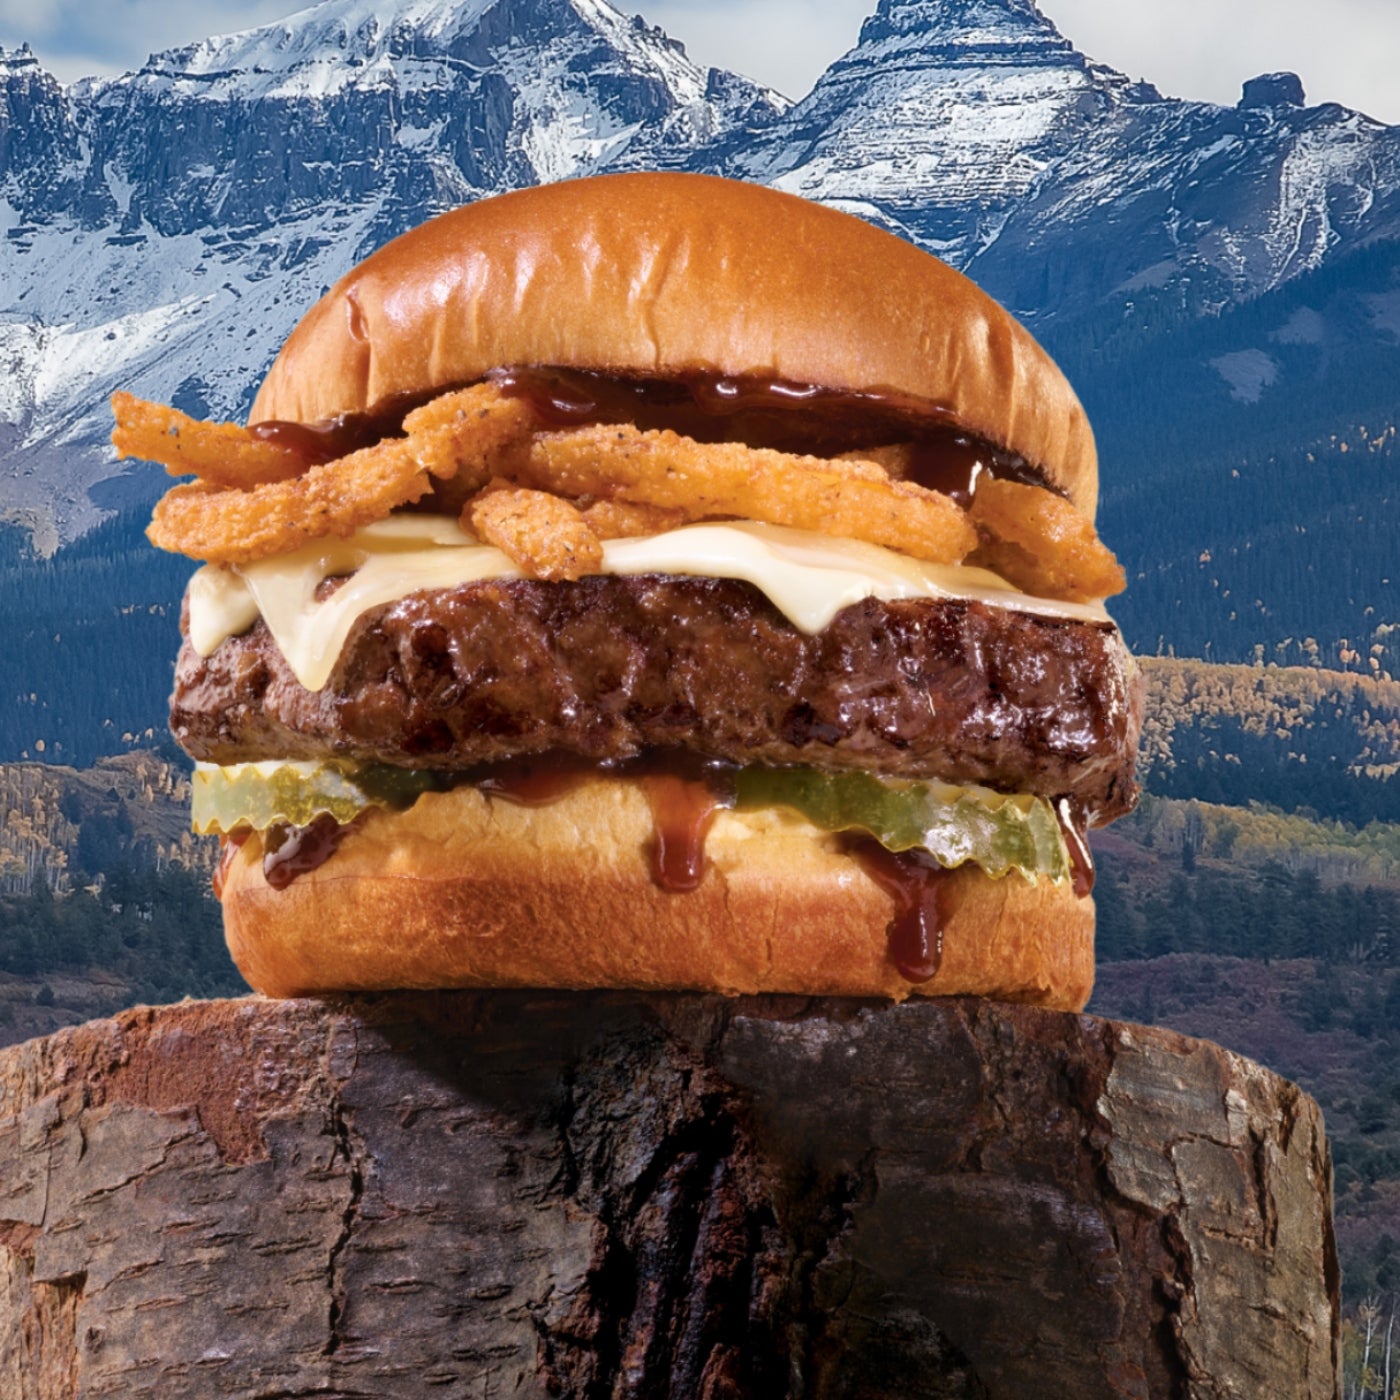 Would You Take a Hike With Arby's for a Big Game Burger?